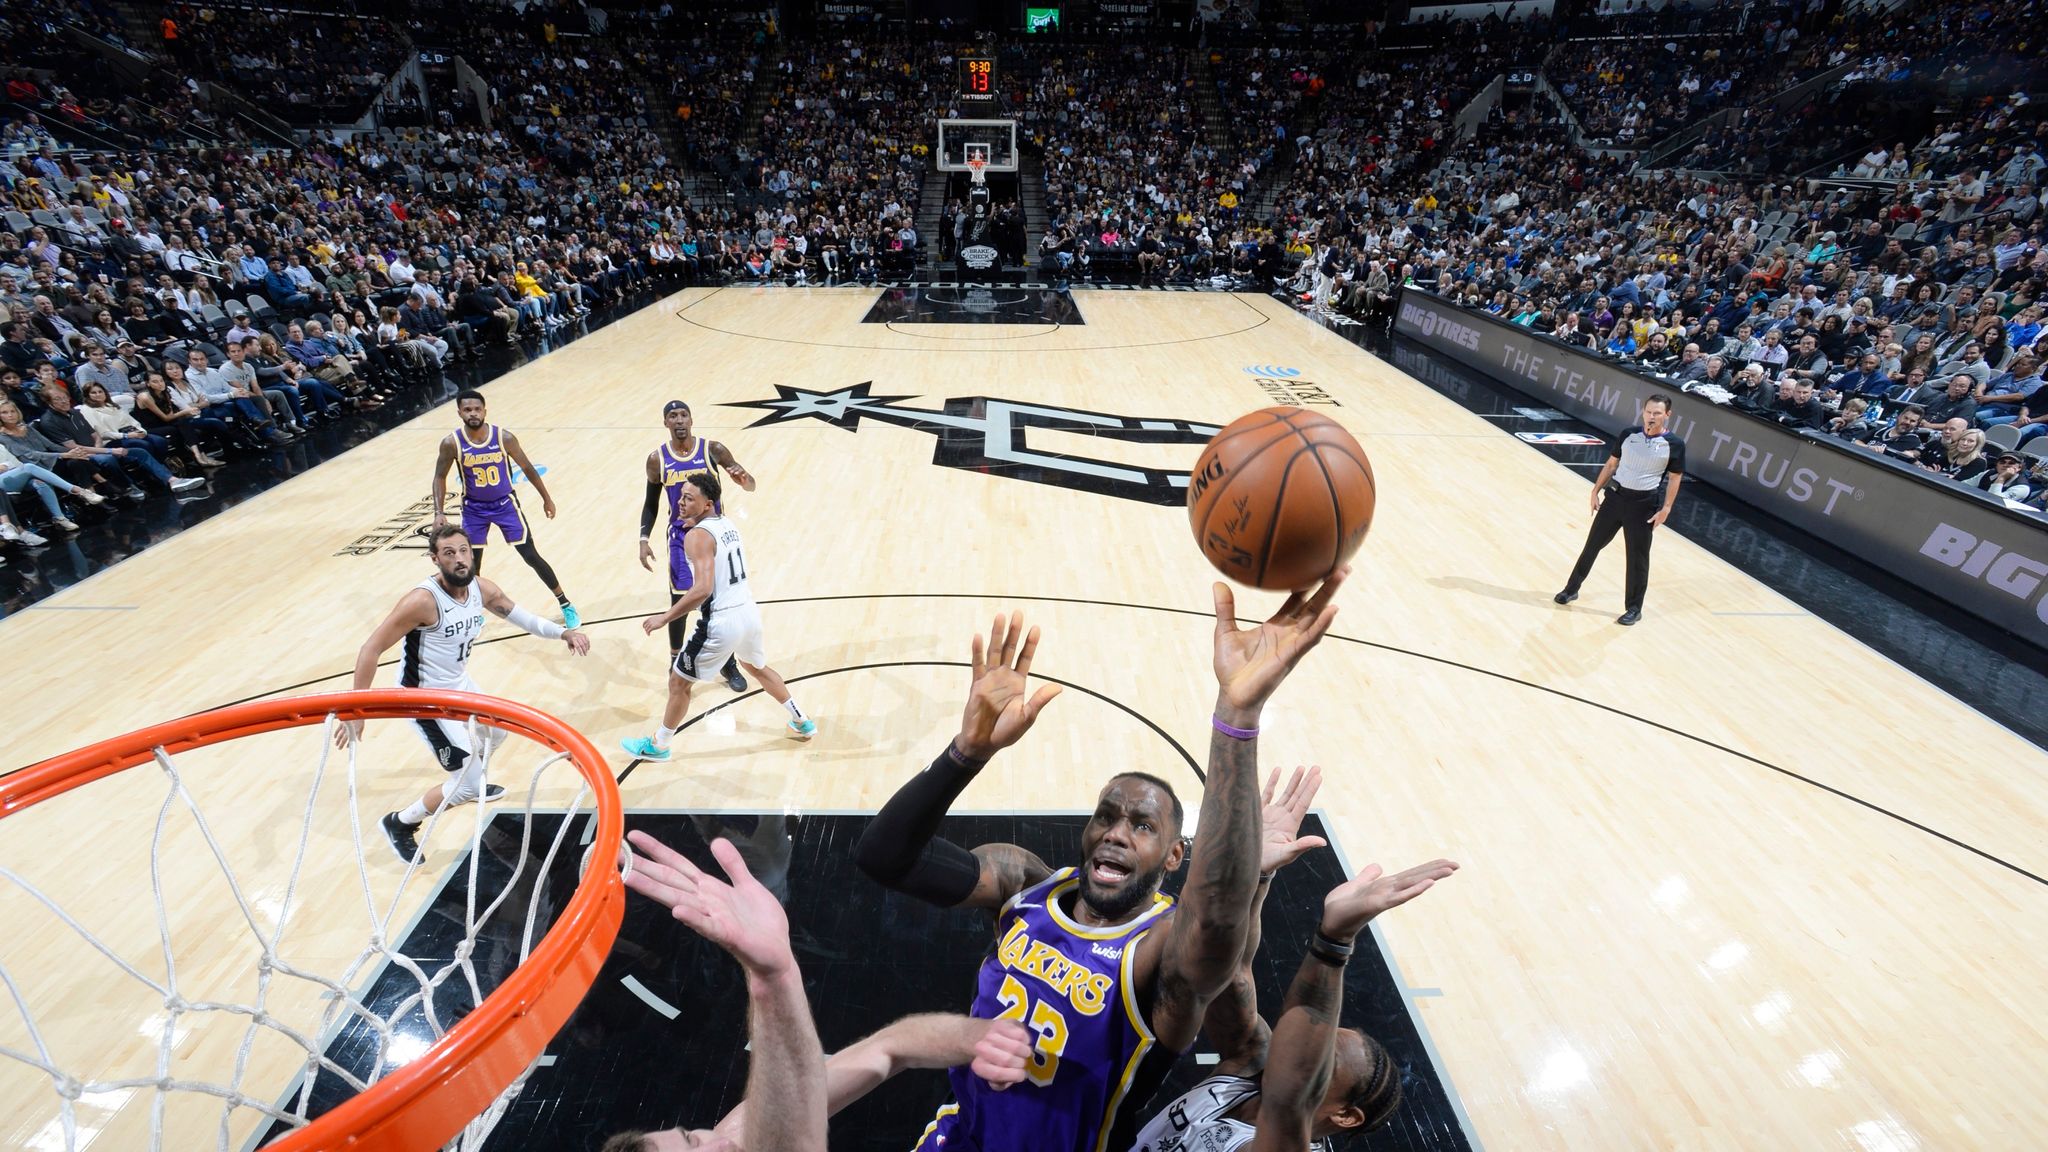 NBA: Leonard scores 25, leads Spurs to rout of Lakers